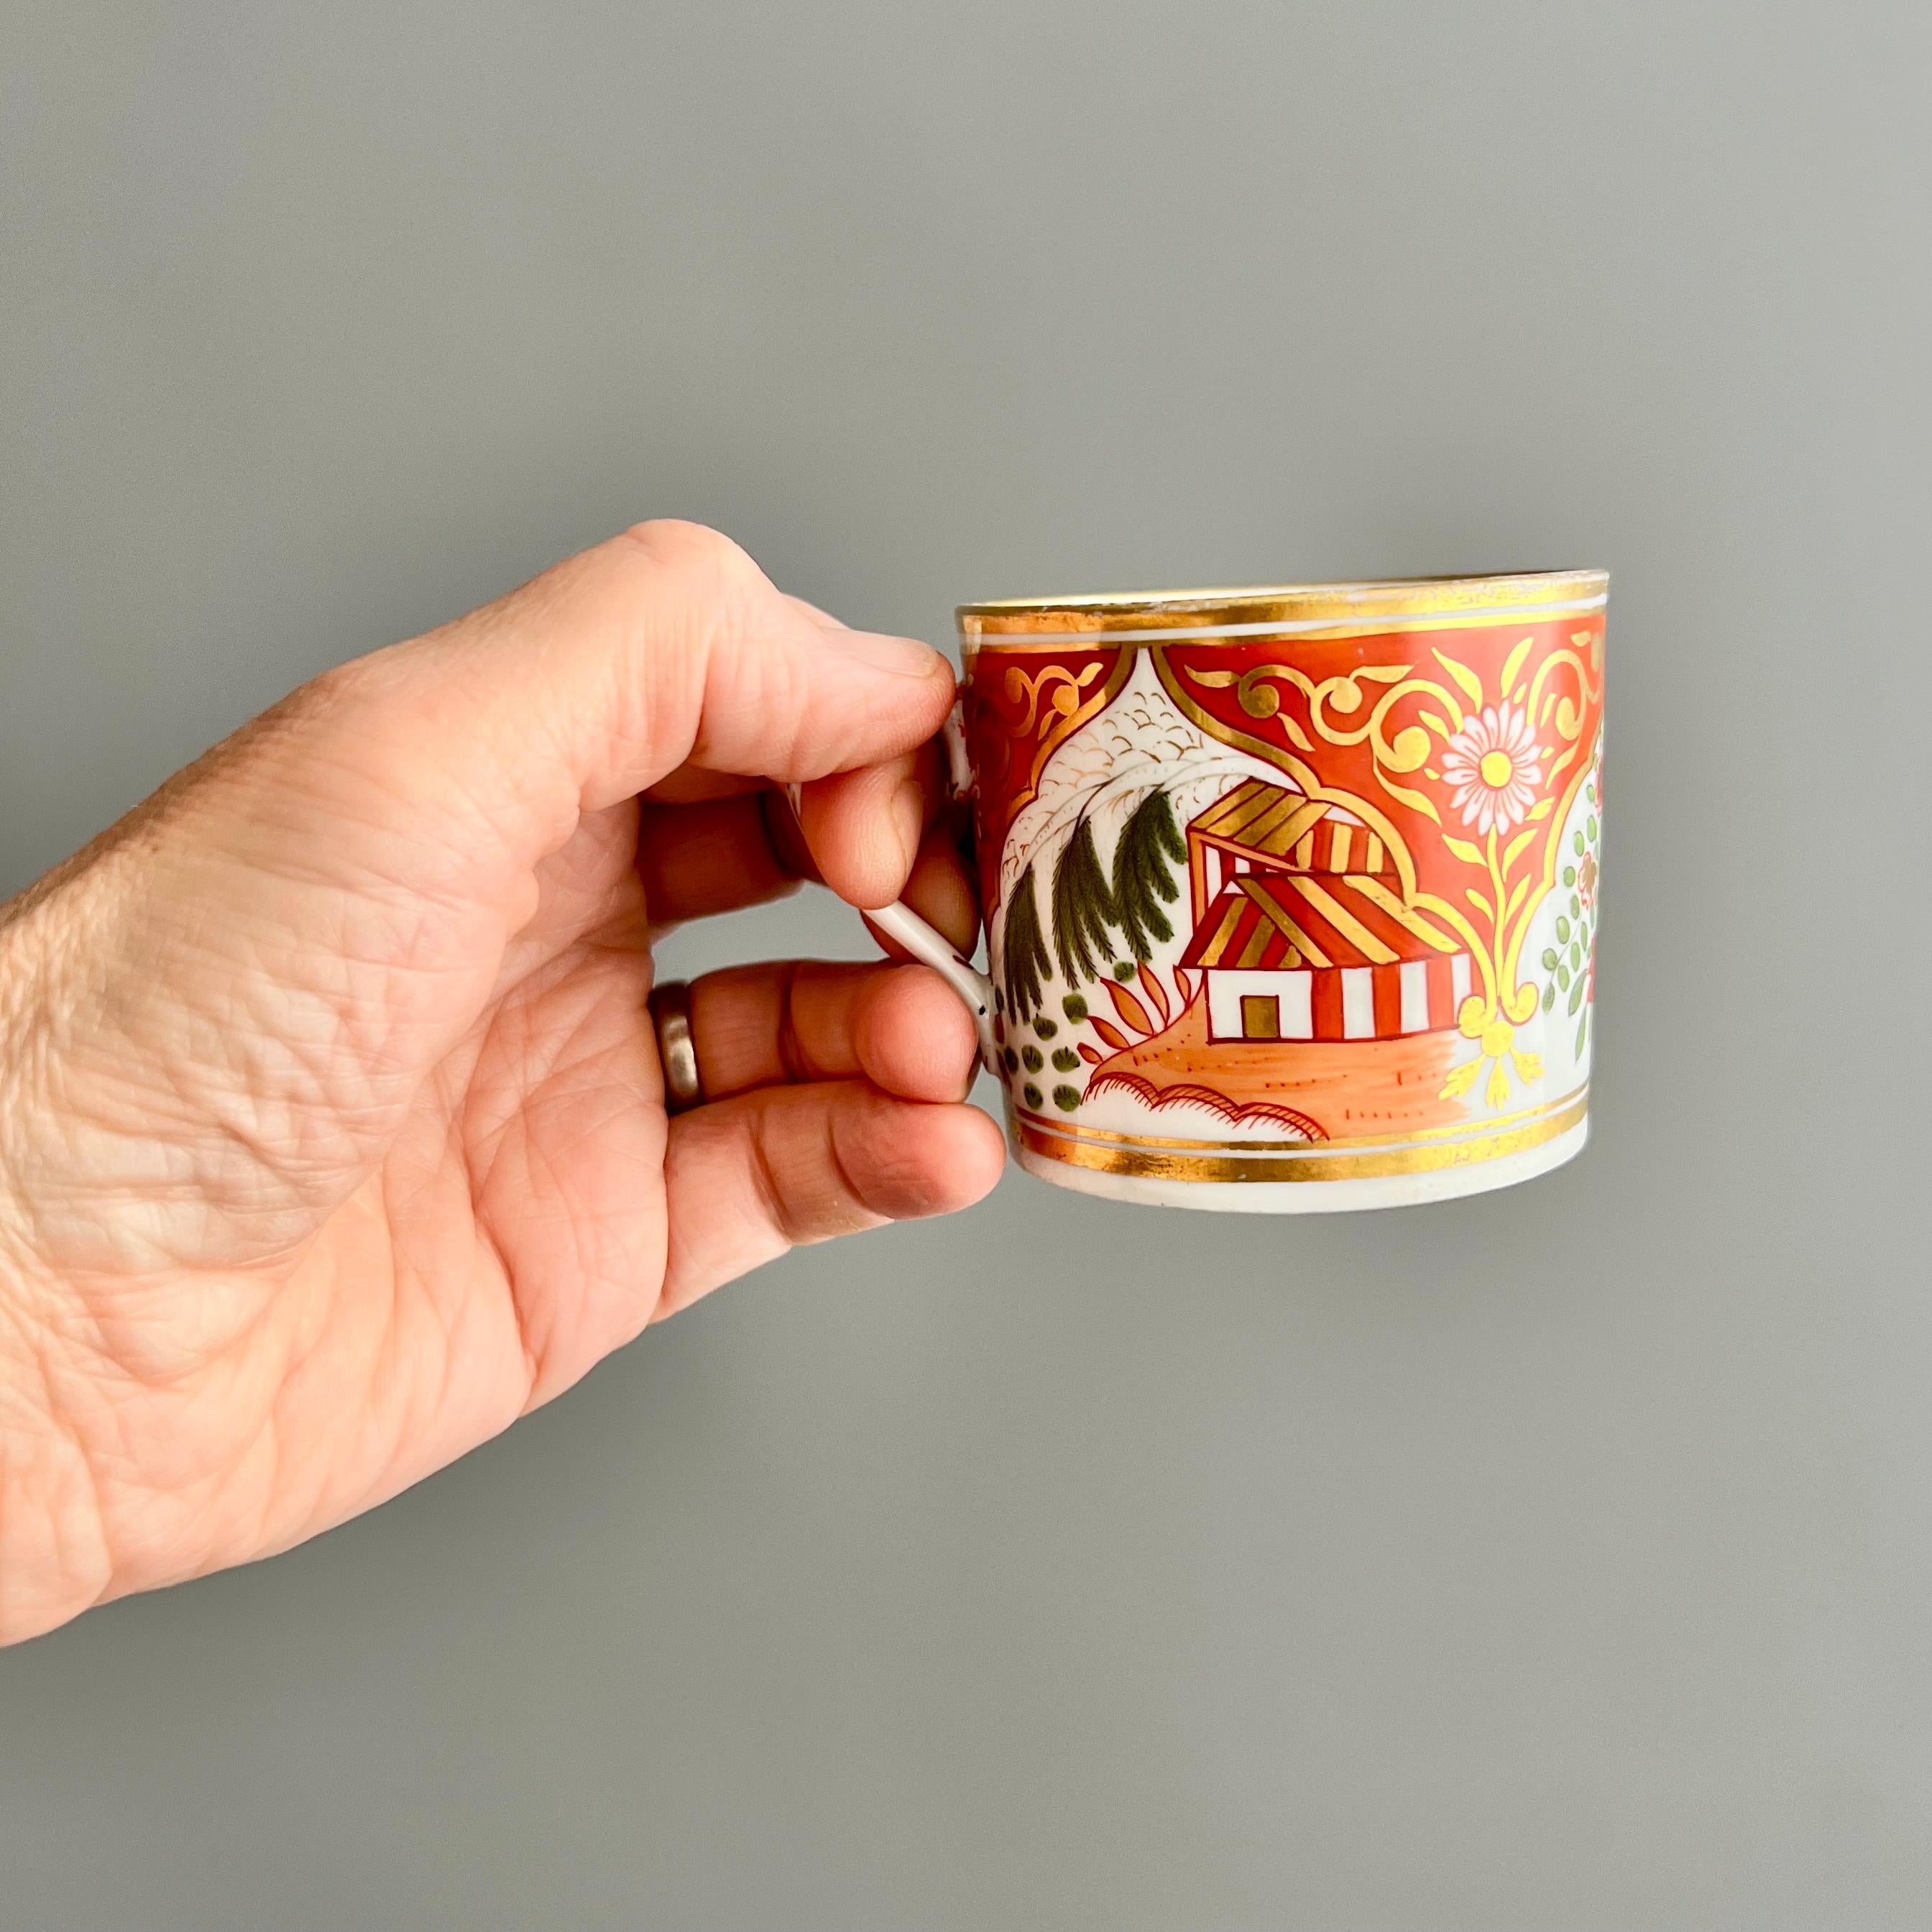 This is a super charming orphaned coffee can made by New Hall probably around the year 1810. The can is made of hybrid paste porcelain and has a wonderful Imari coloured pattern with a house and trees. This coffee can lost its saucer, but it is